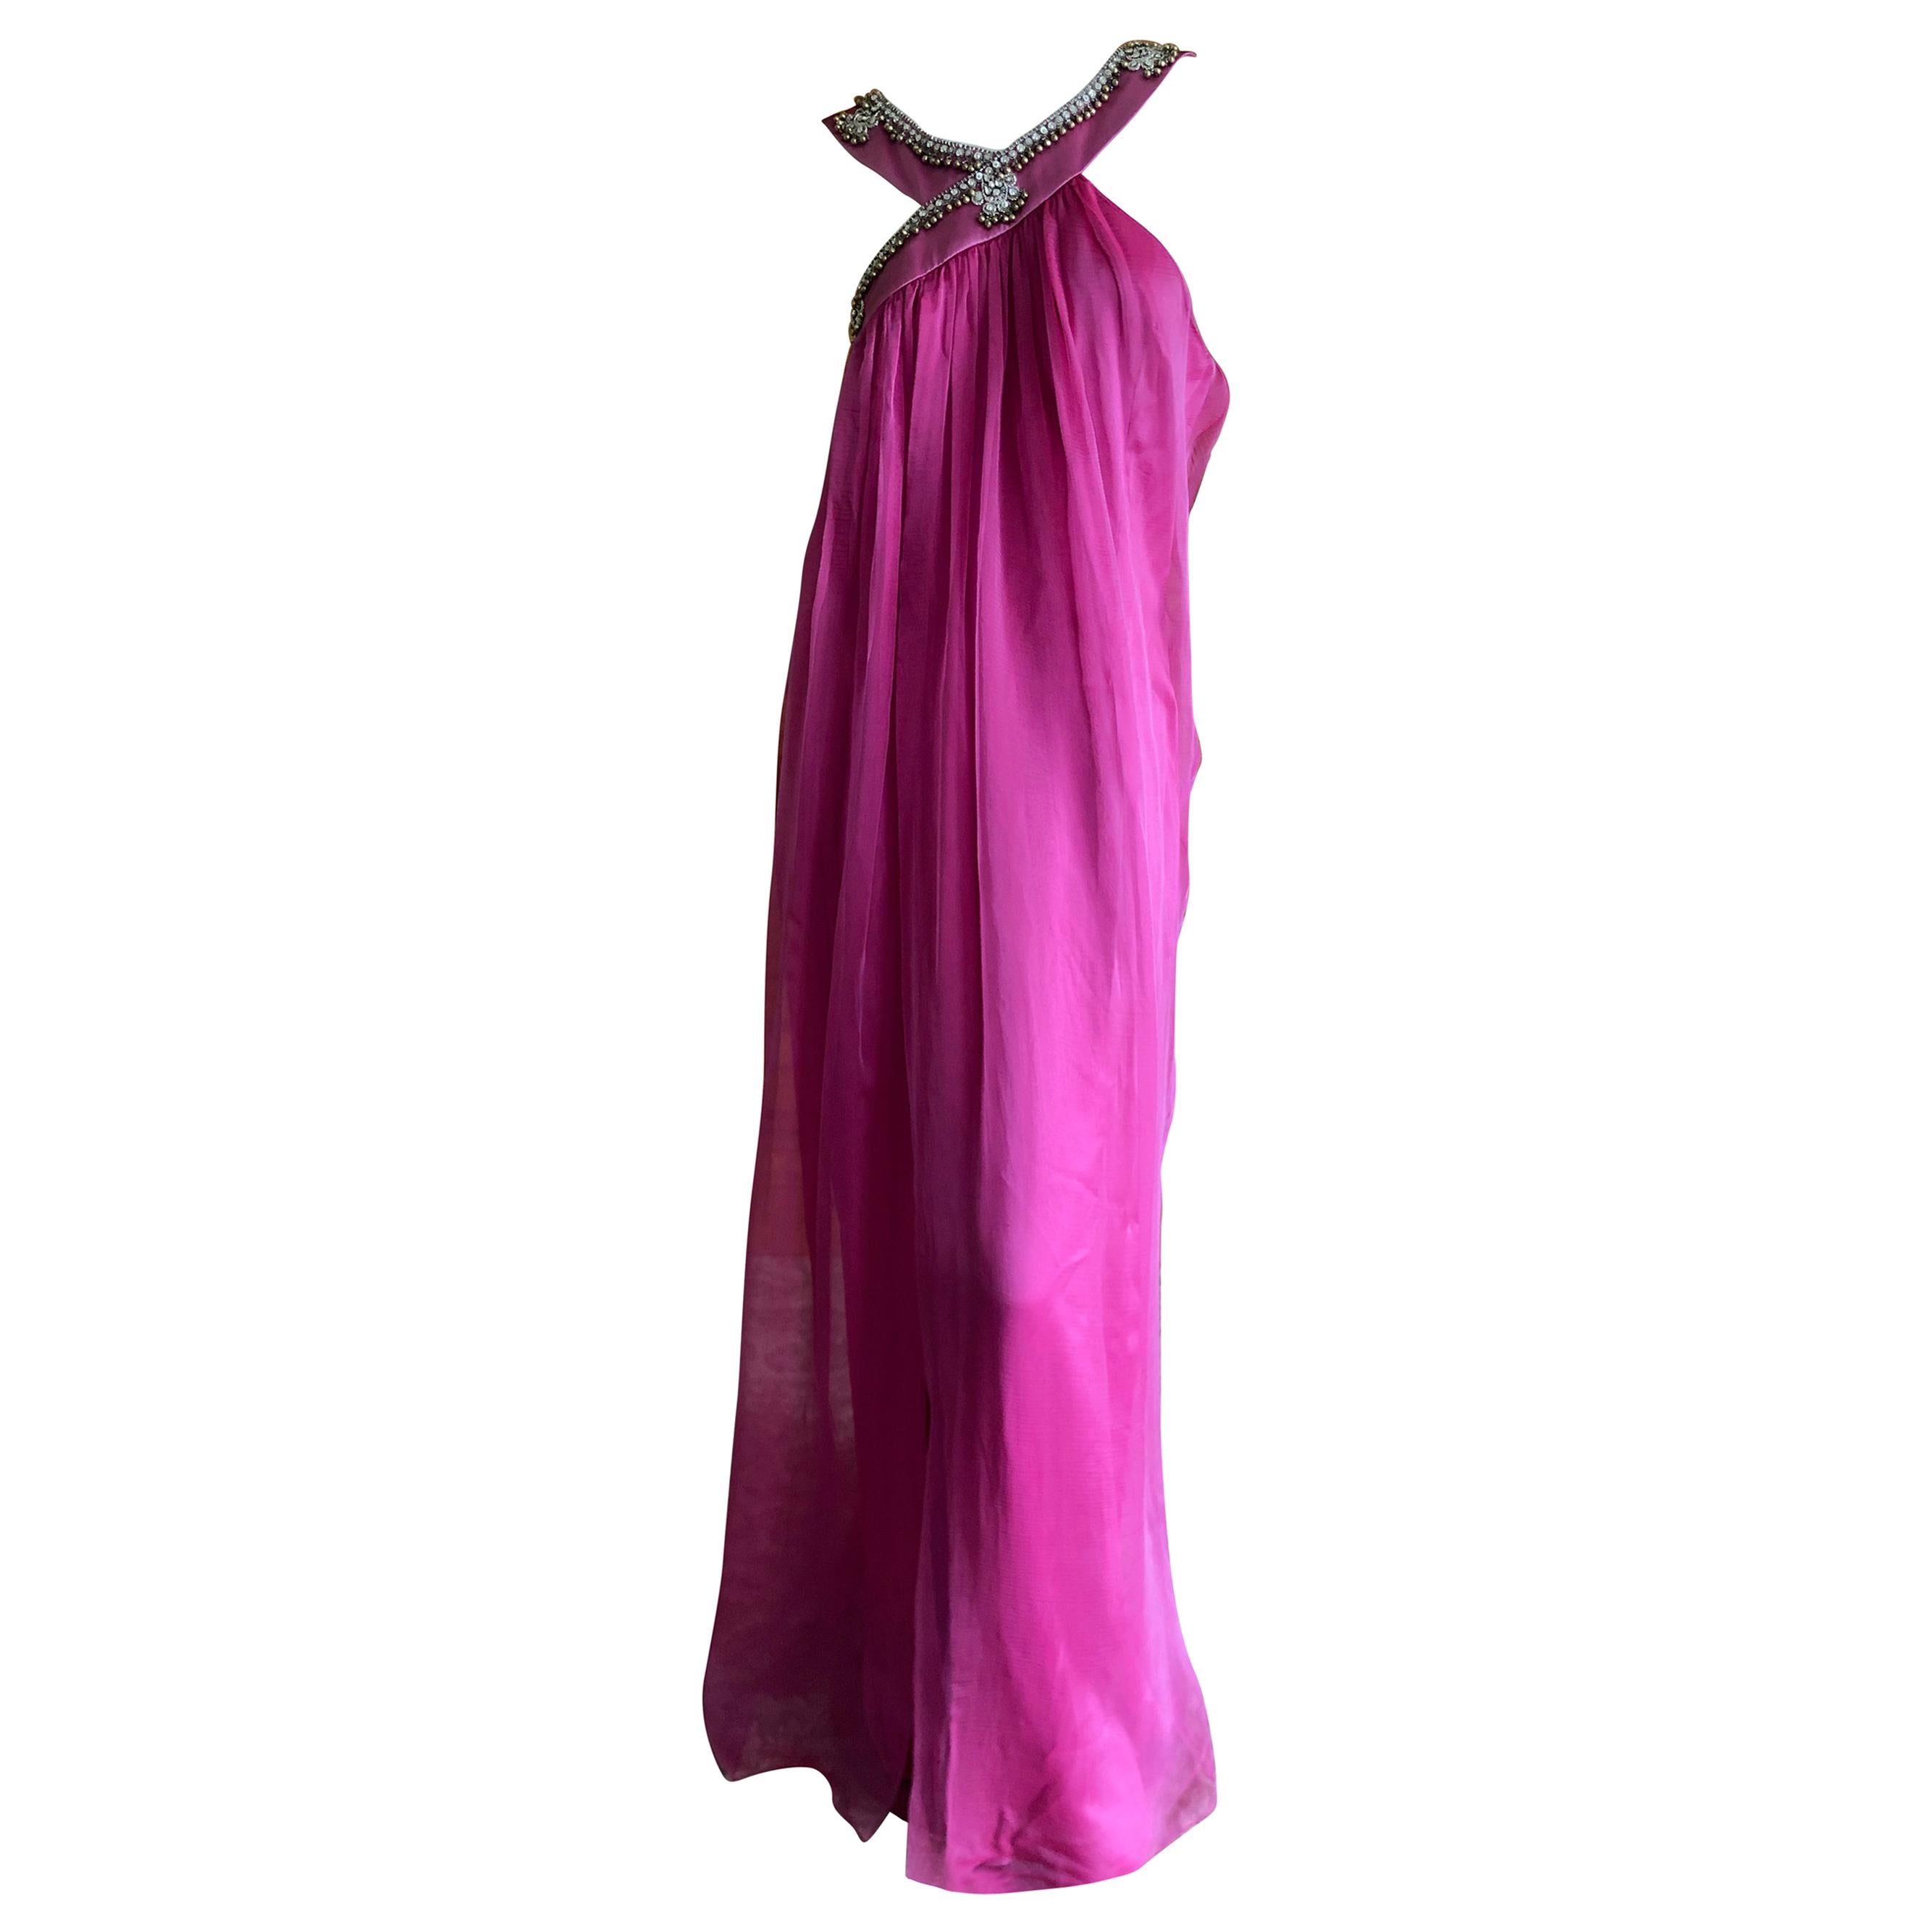 Christian Dior by Gianfranco Ferre A/W 1996 "Indian Passion" Sari Style Dress  For Sale